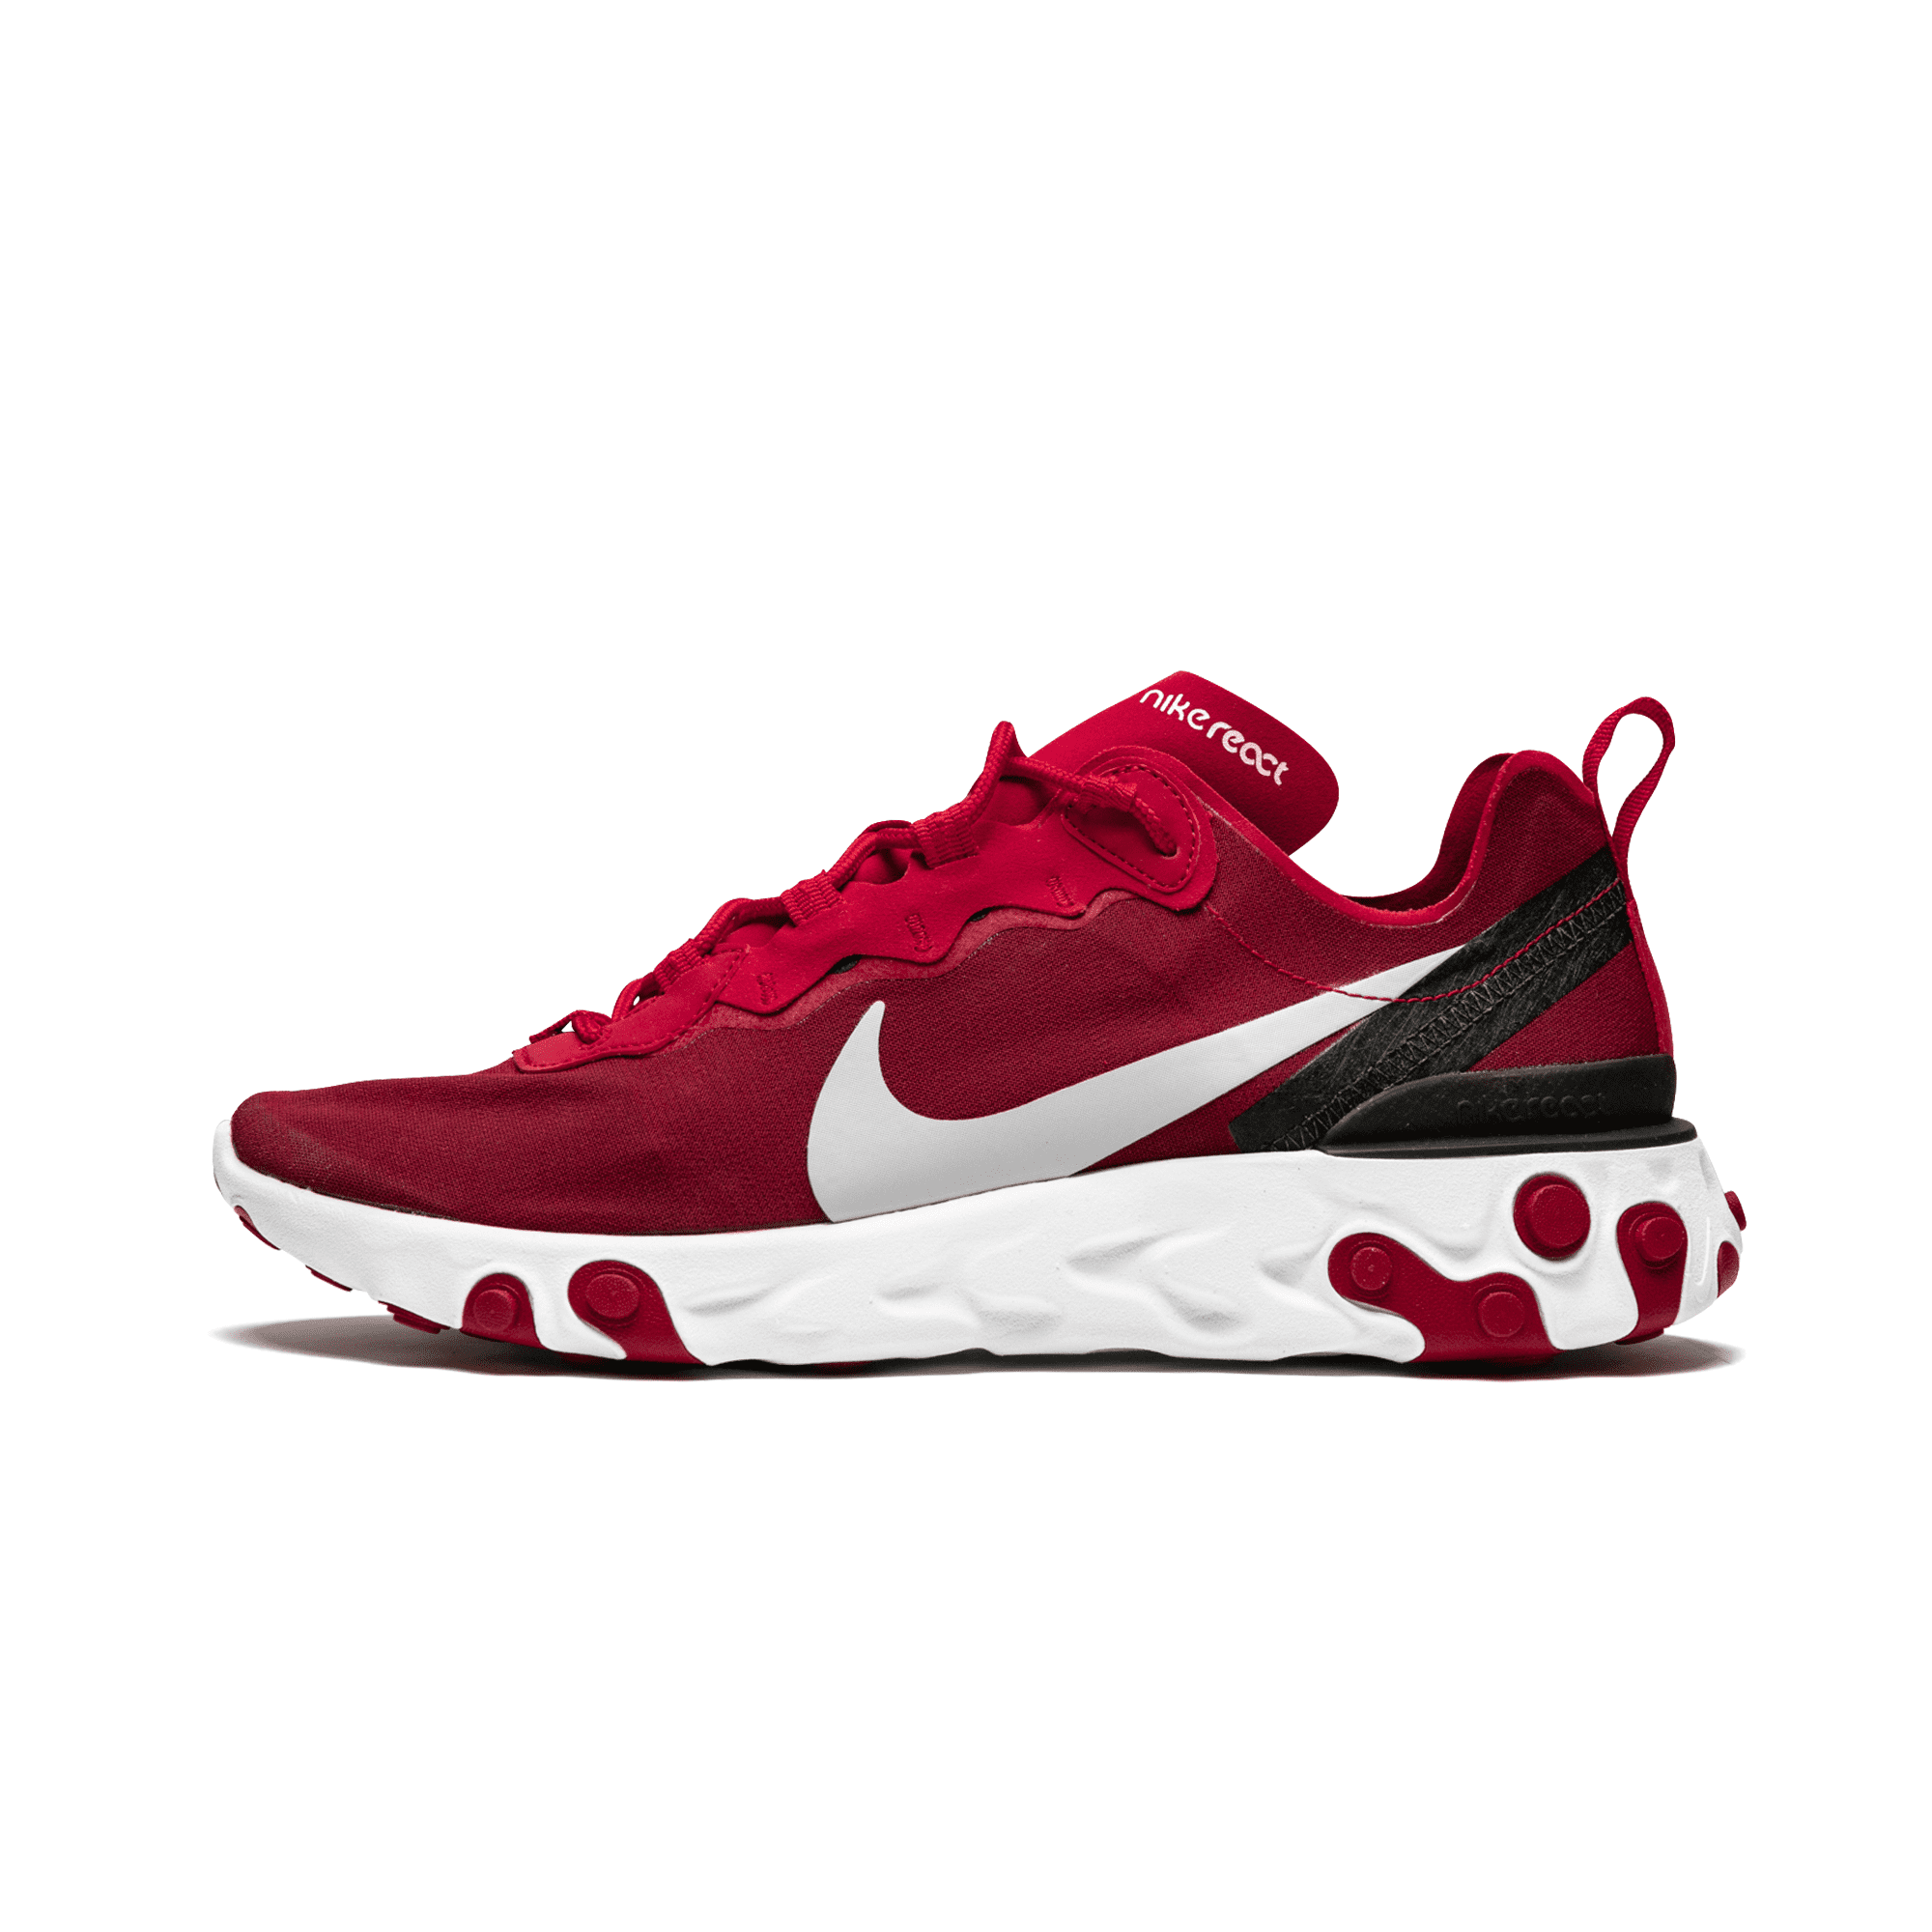 React Element 55  “Gym Red” (4304081125448)